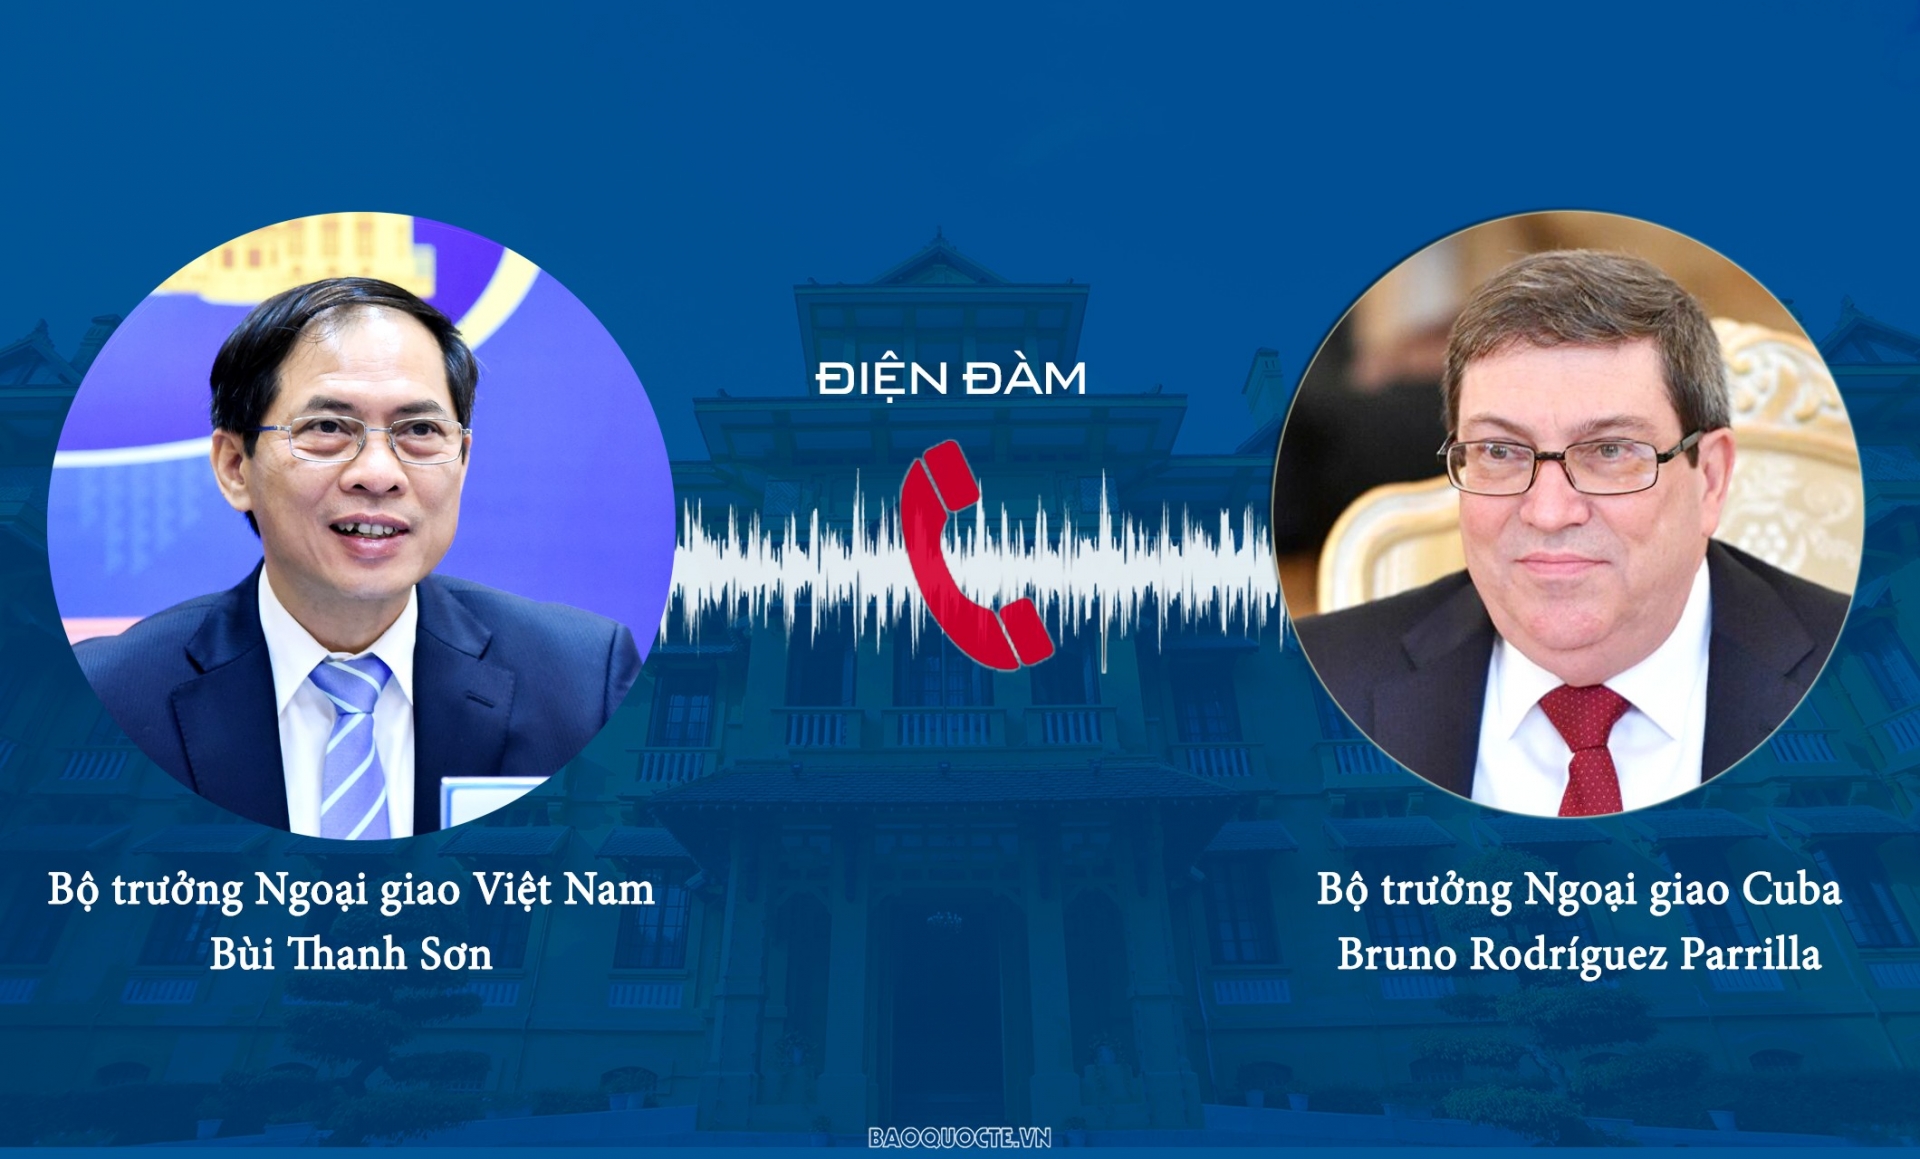 Vietnam News Today (May 8): PM demands appropriate responses to COVID-19